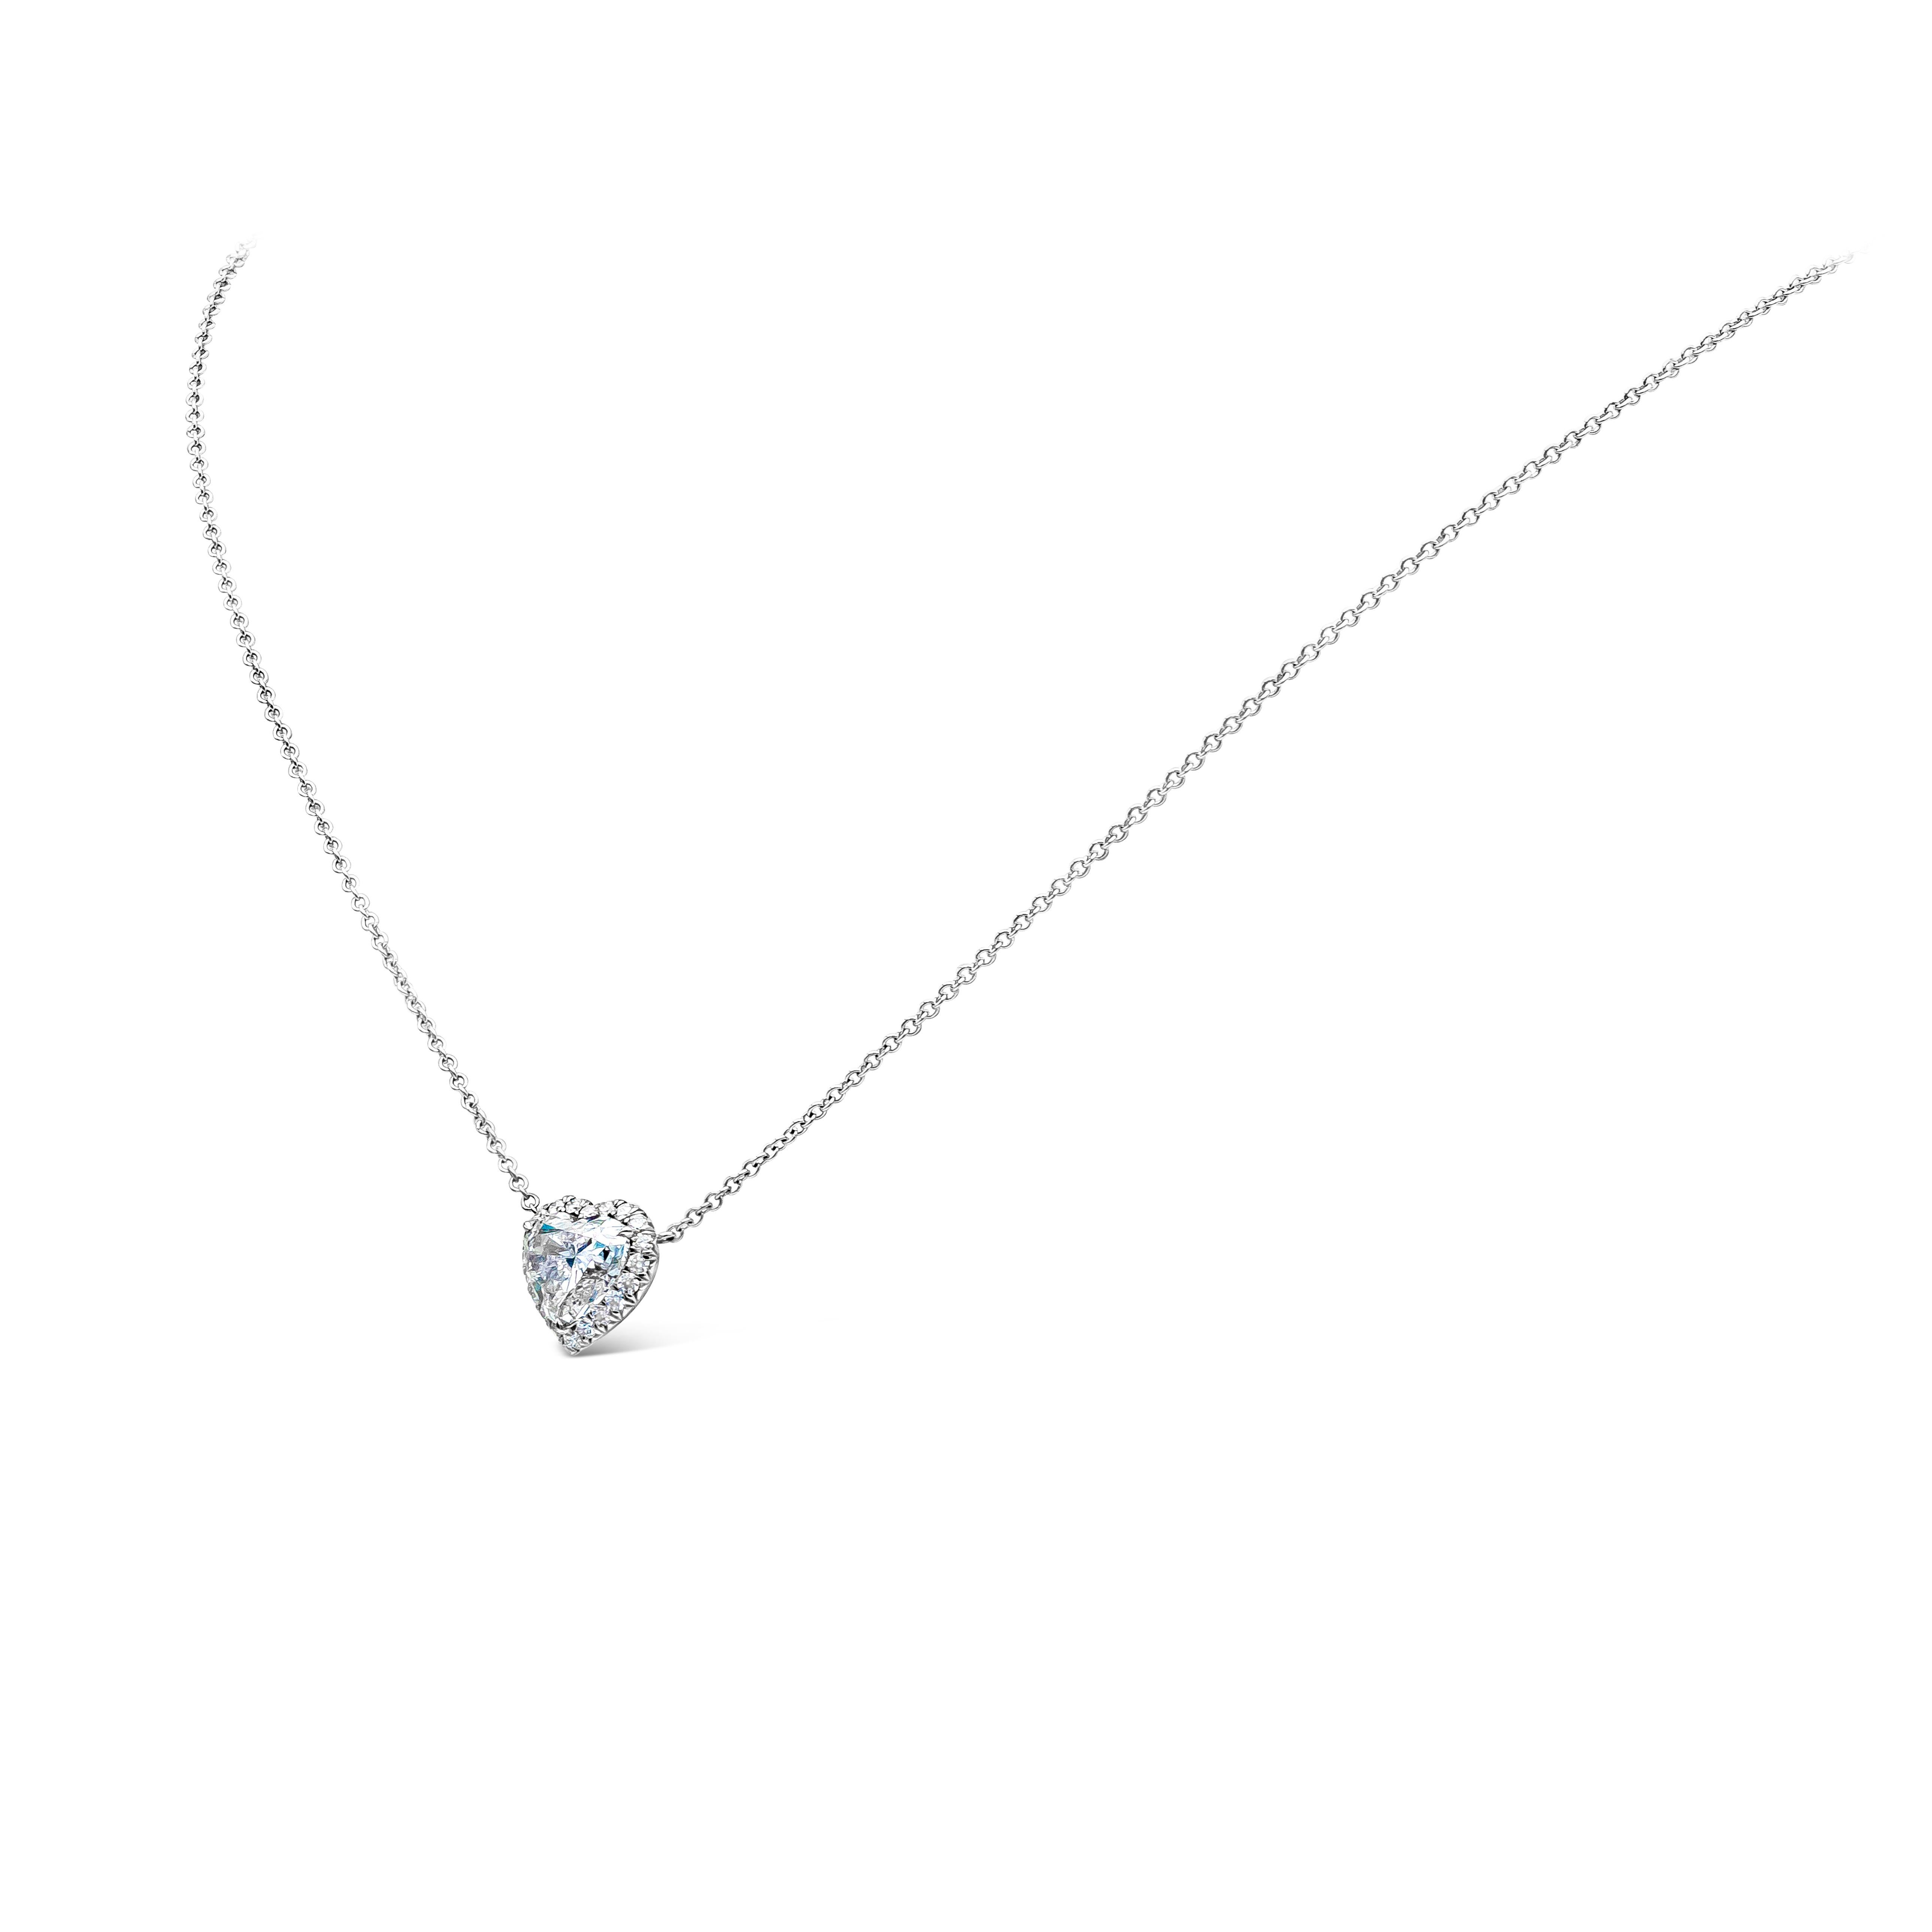 A simply elegant piece showcasing a GIA Certified 1.80 carat heart shape pendant necklace, H Color and SI2 in Clarity. Surrounded by a row of round diamonds weighing 0.23 carats total, H Color and VS-SI in Clarity set in Platinum. Made with 18K